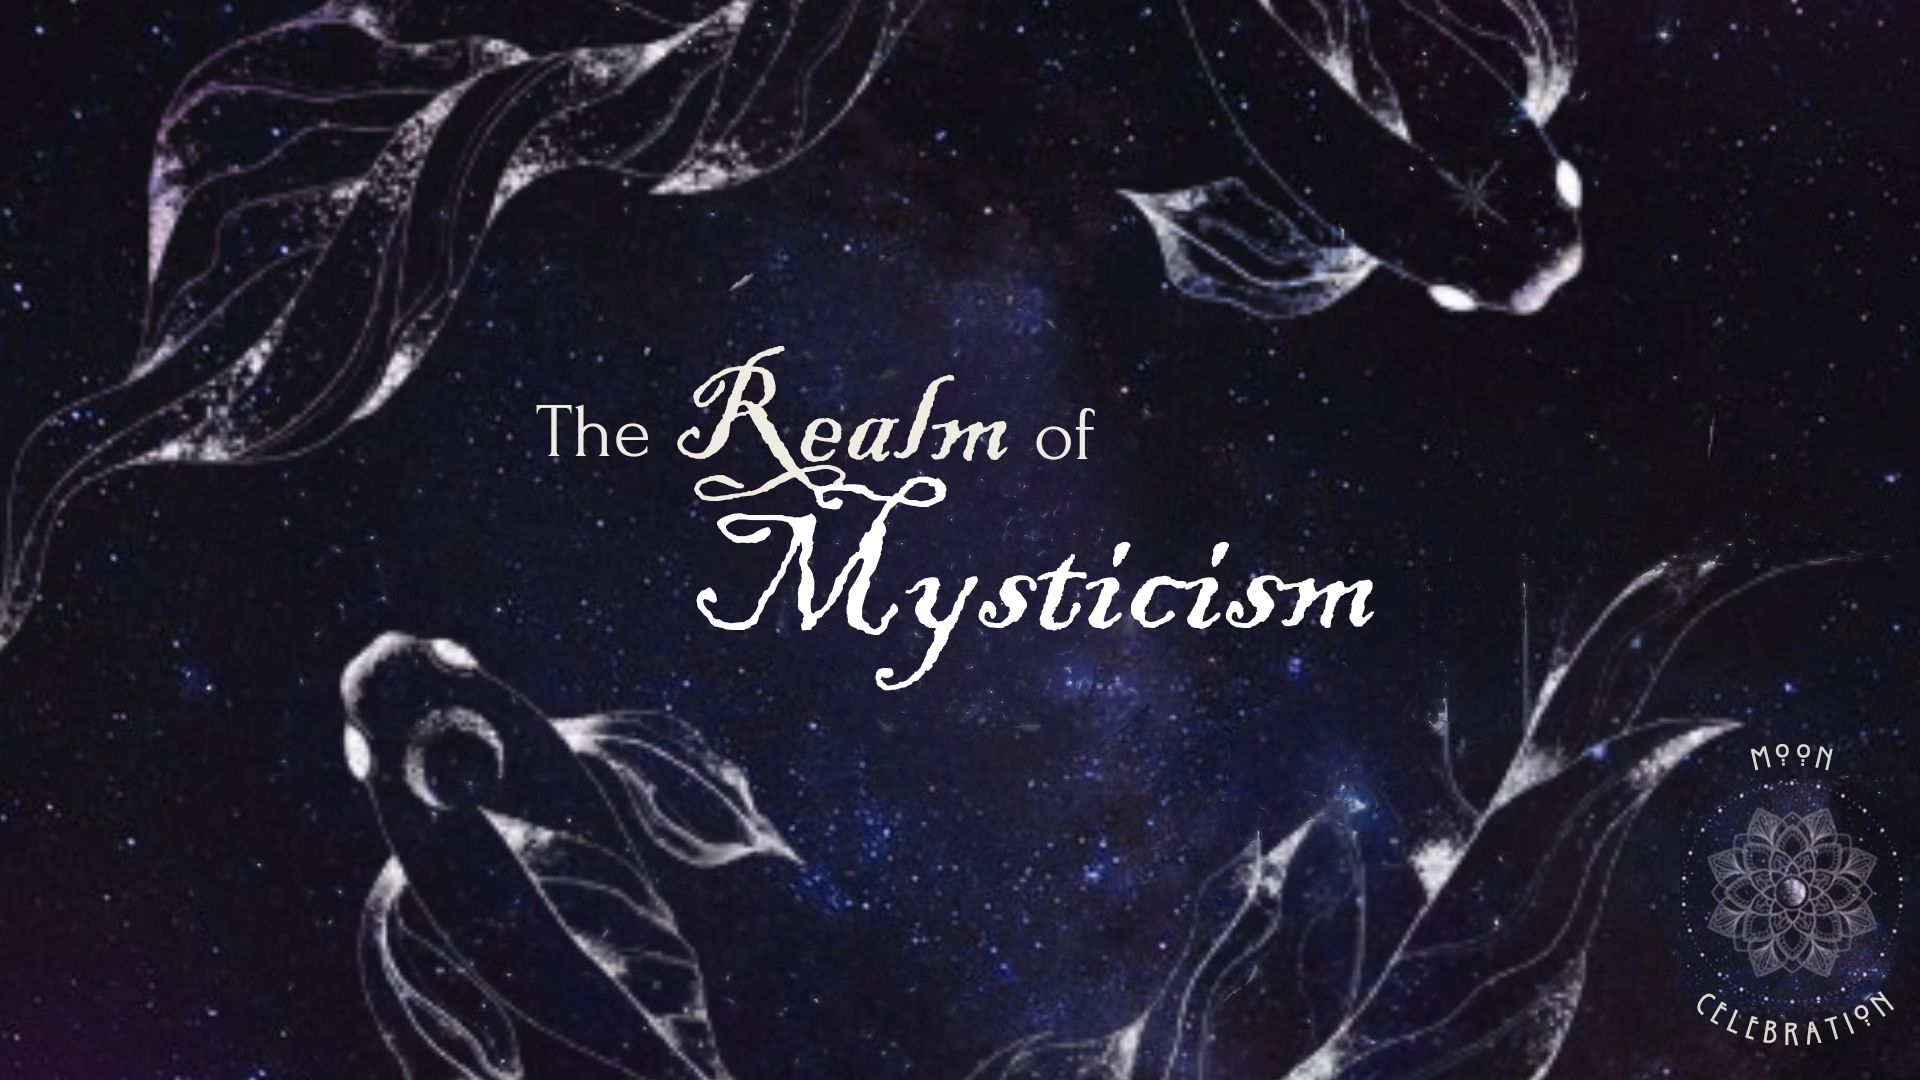 Moon Celebration: The Realm of Mysticism